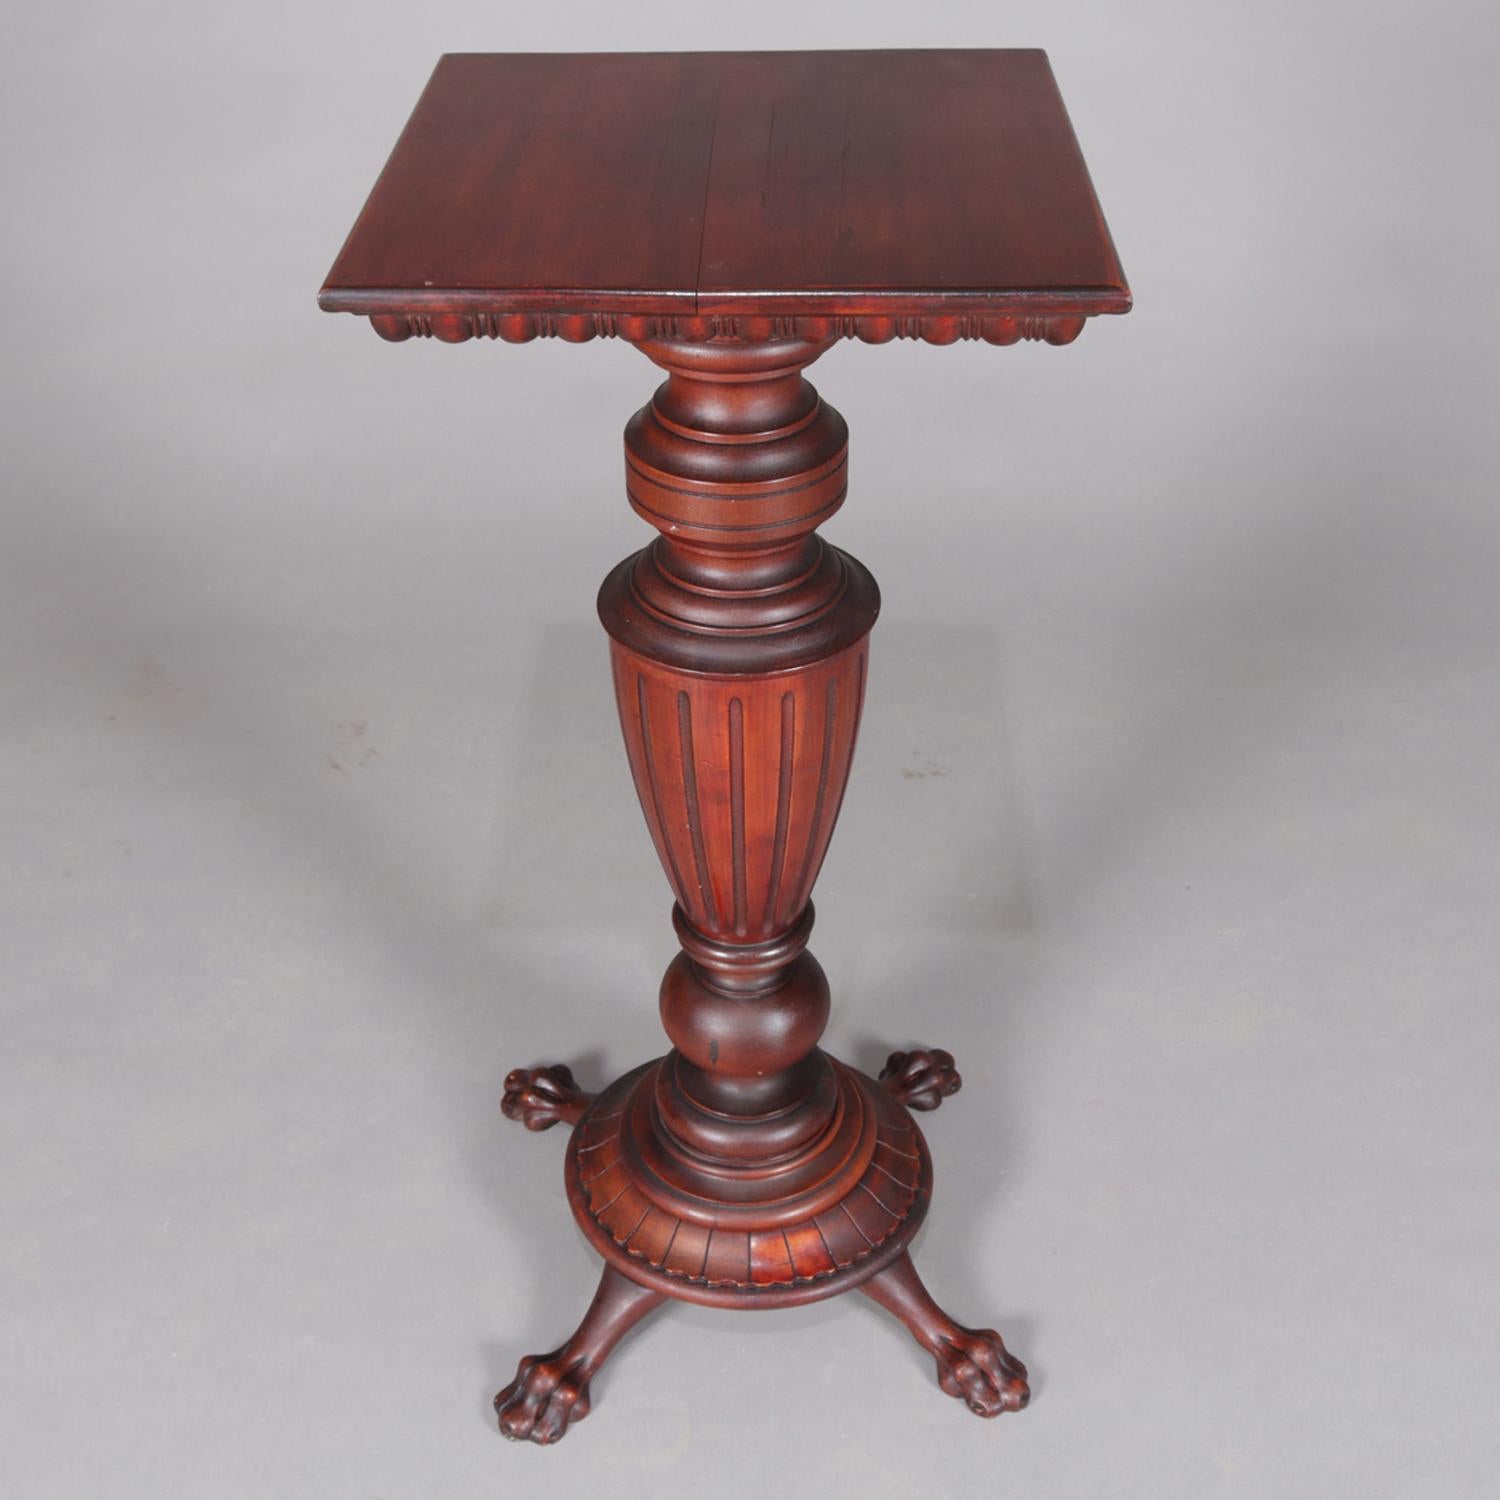 An antique R.J. Horner School sculpture pedestal features carved mahogany construction with display having beaded border surmounting reeded urn form pedestal raised on paw feet, circa 1920.

Measures: 35.75